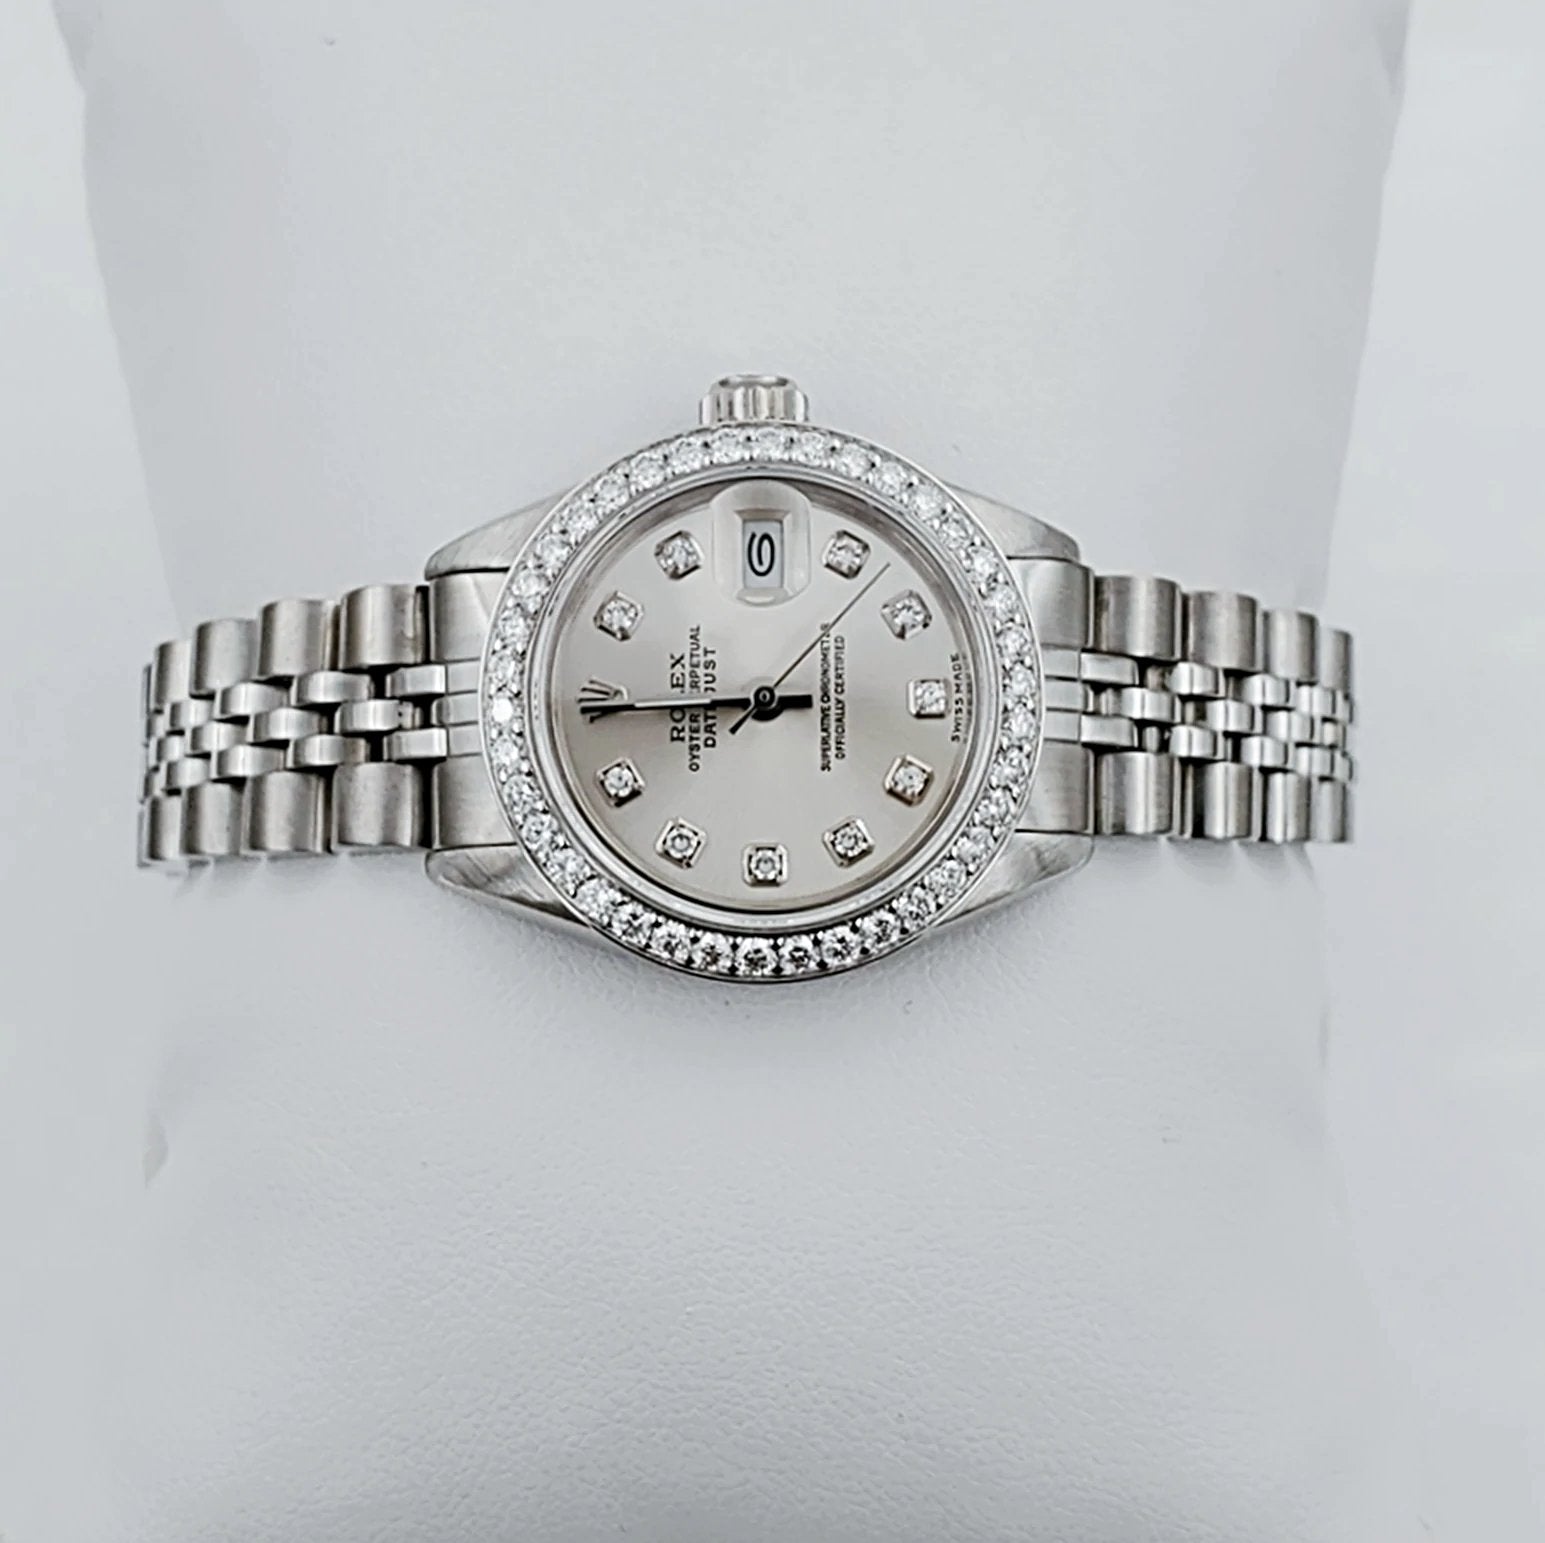 Ladies Rolex 26mm DateJust Stainless Steel Watch with Silver Diamond Dial and Diamond Bezel. (Pre-Owned 69174)